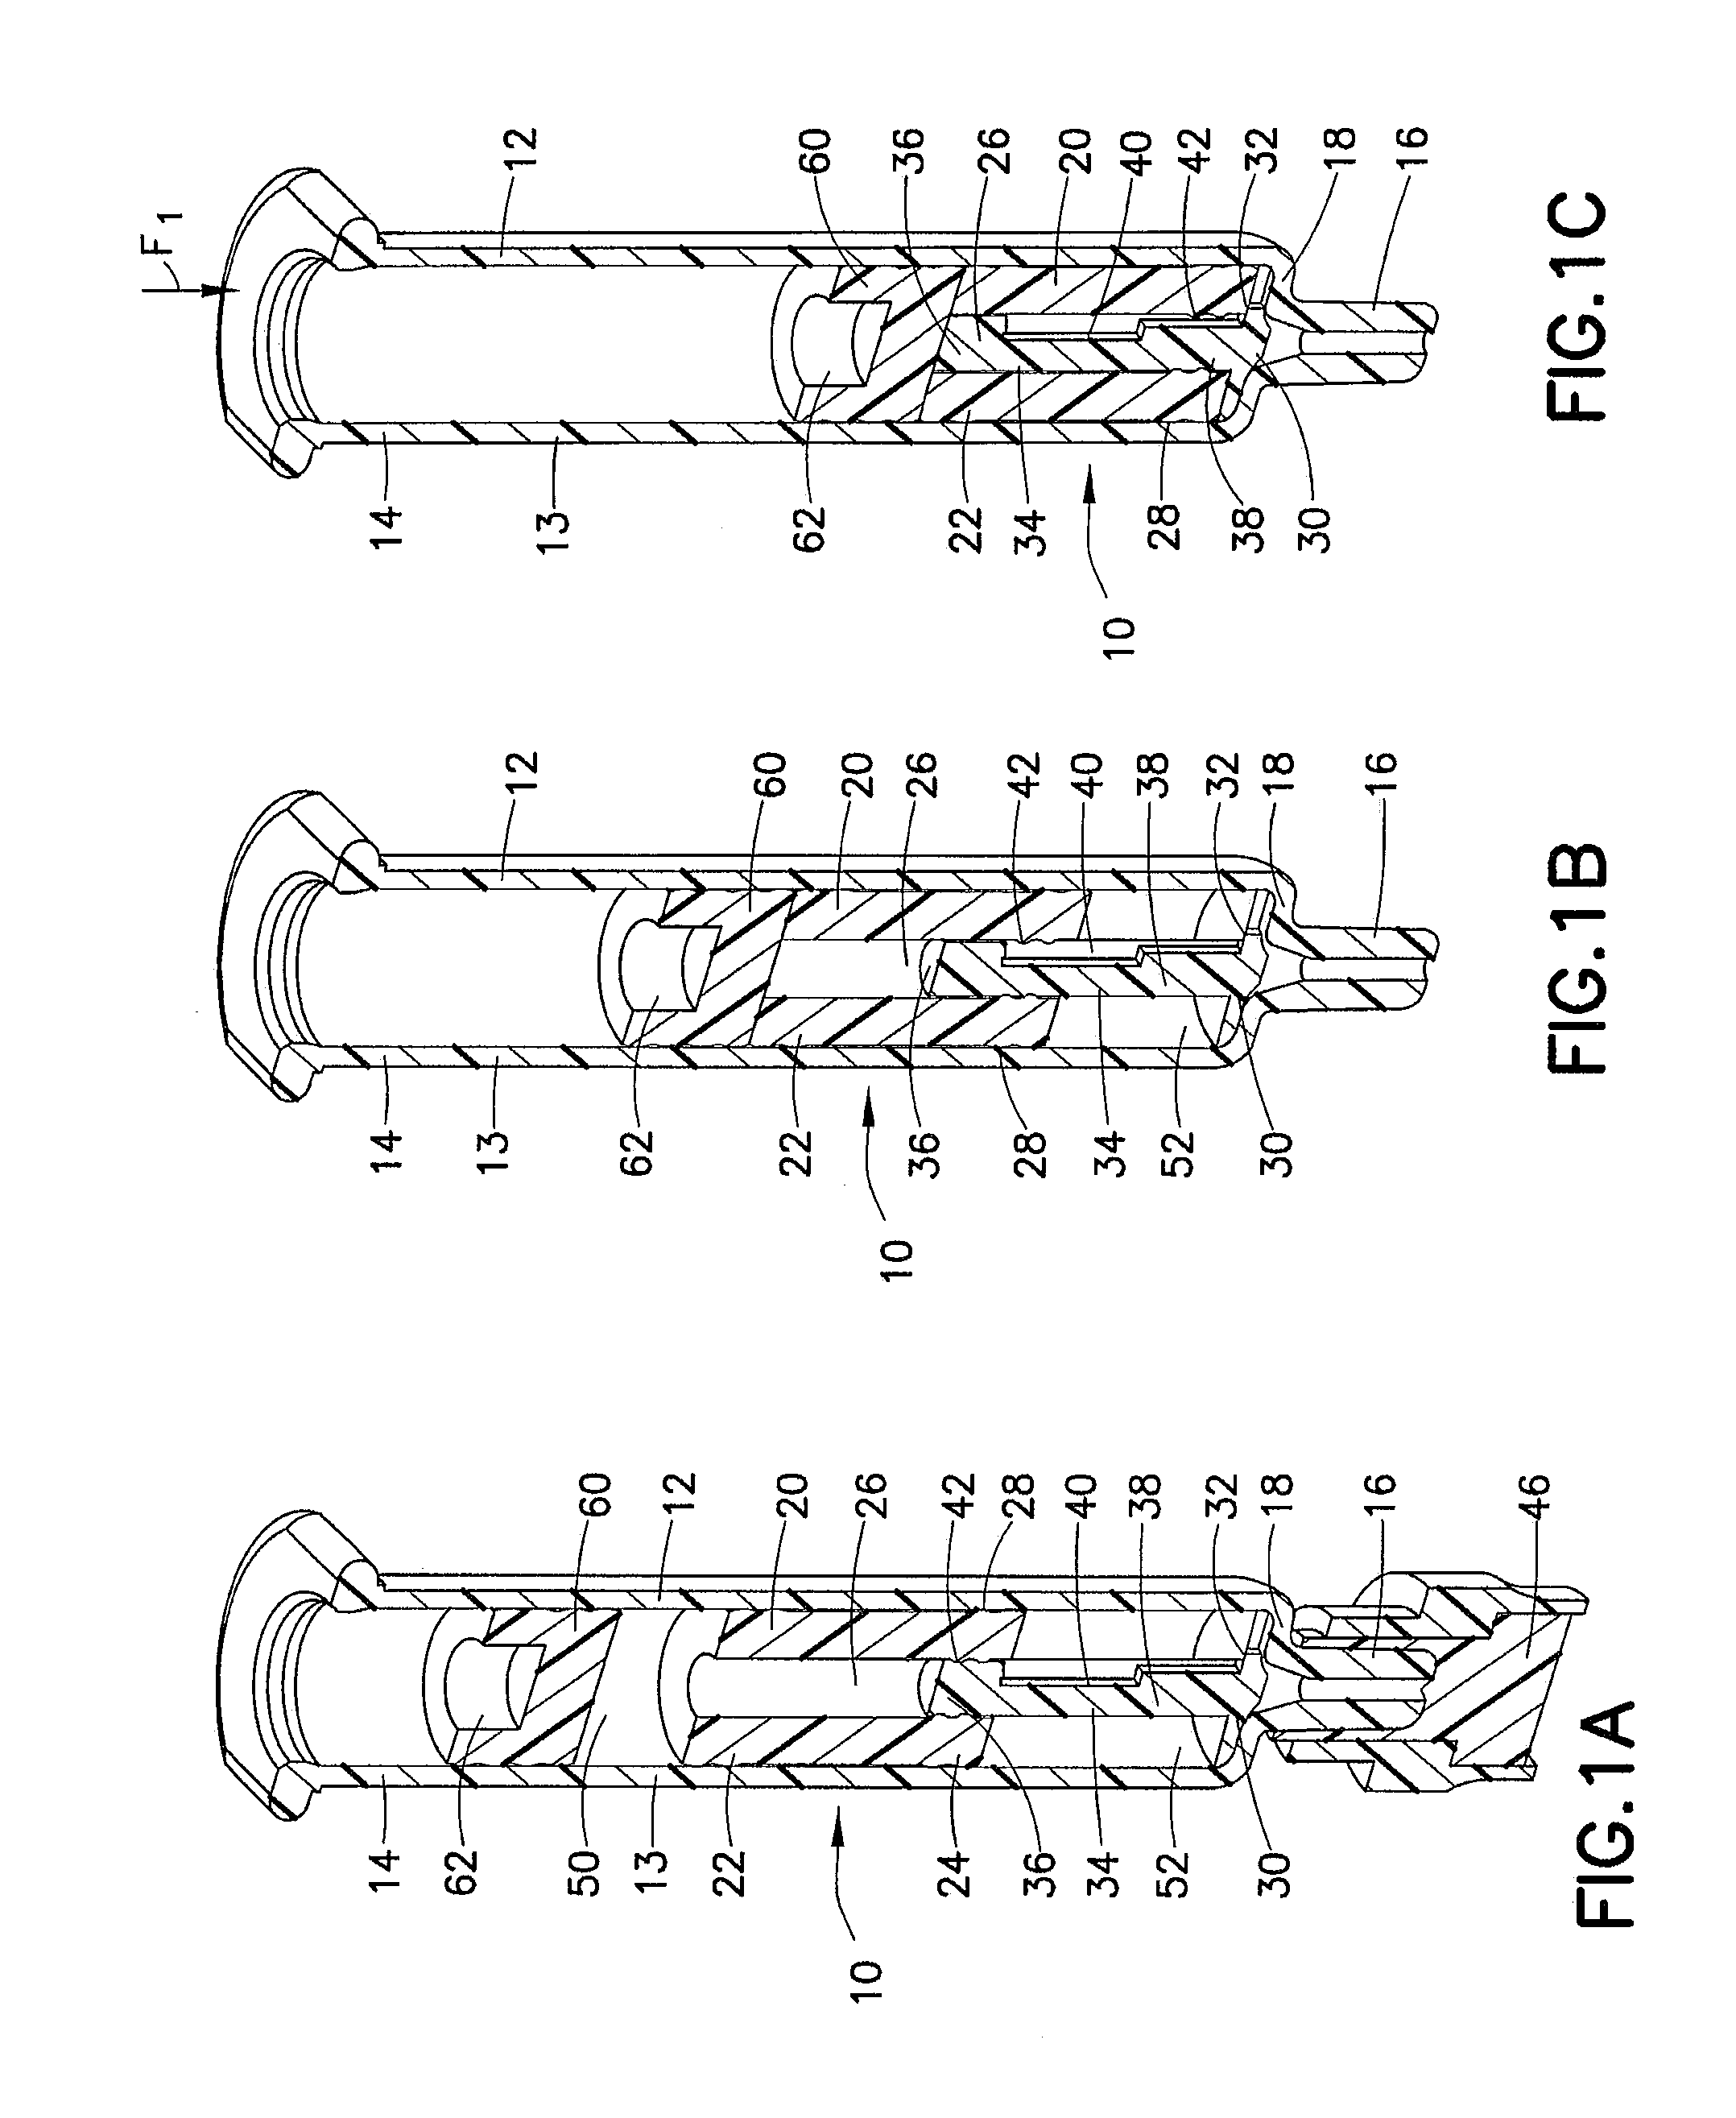 Valve Permitting Mixing in a Drug Delivery Device